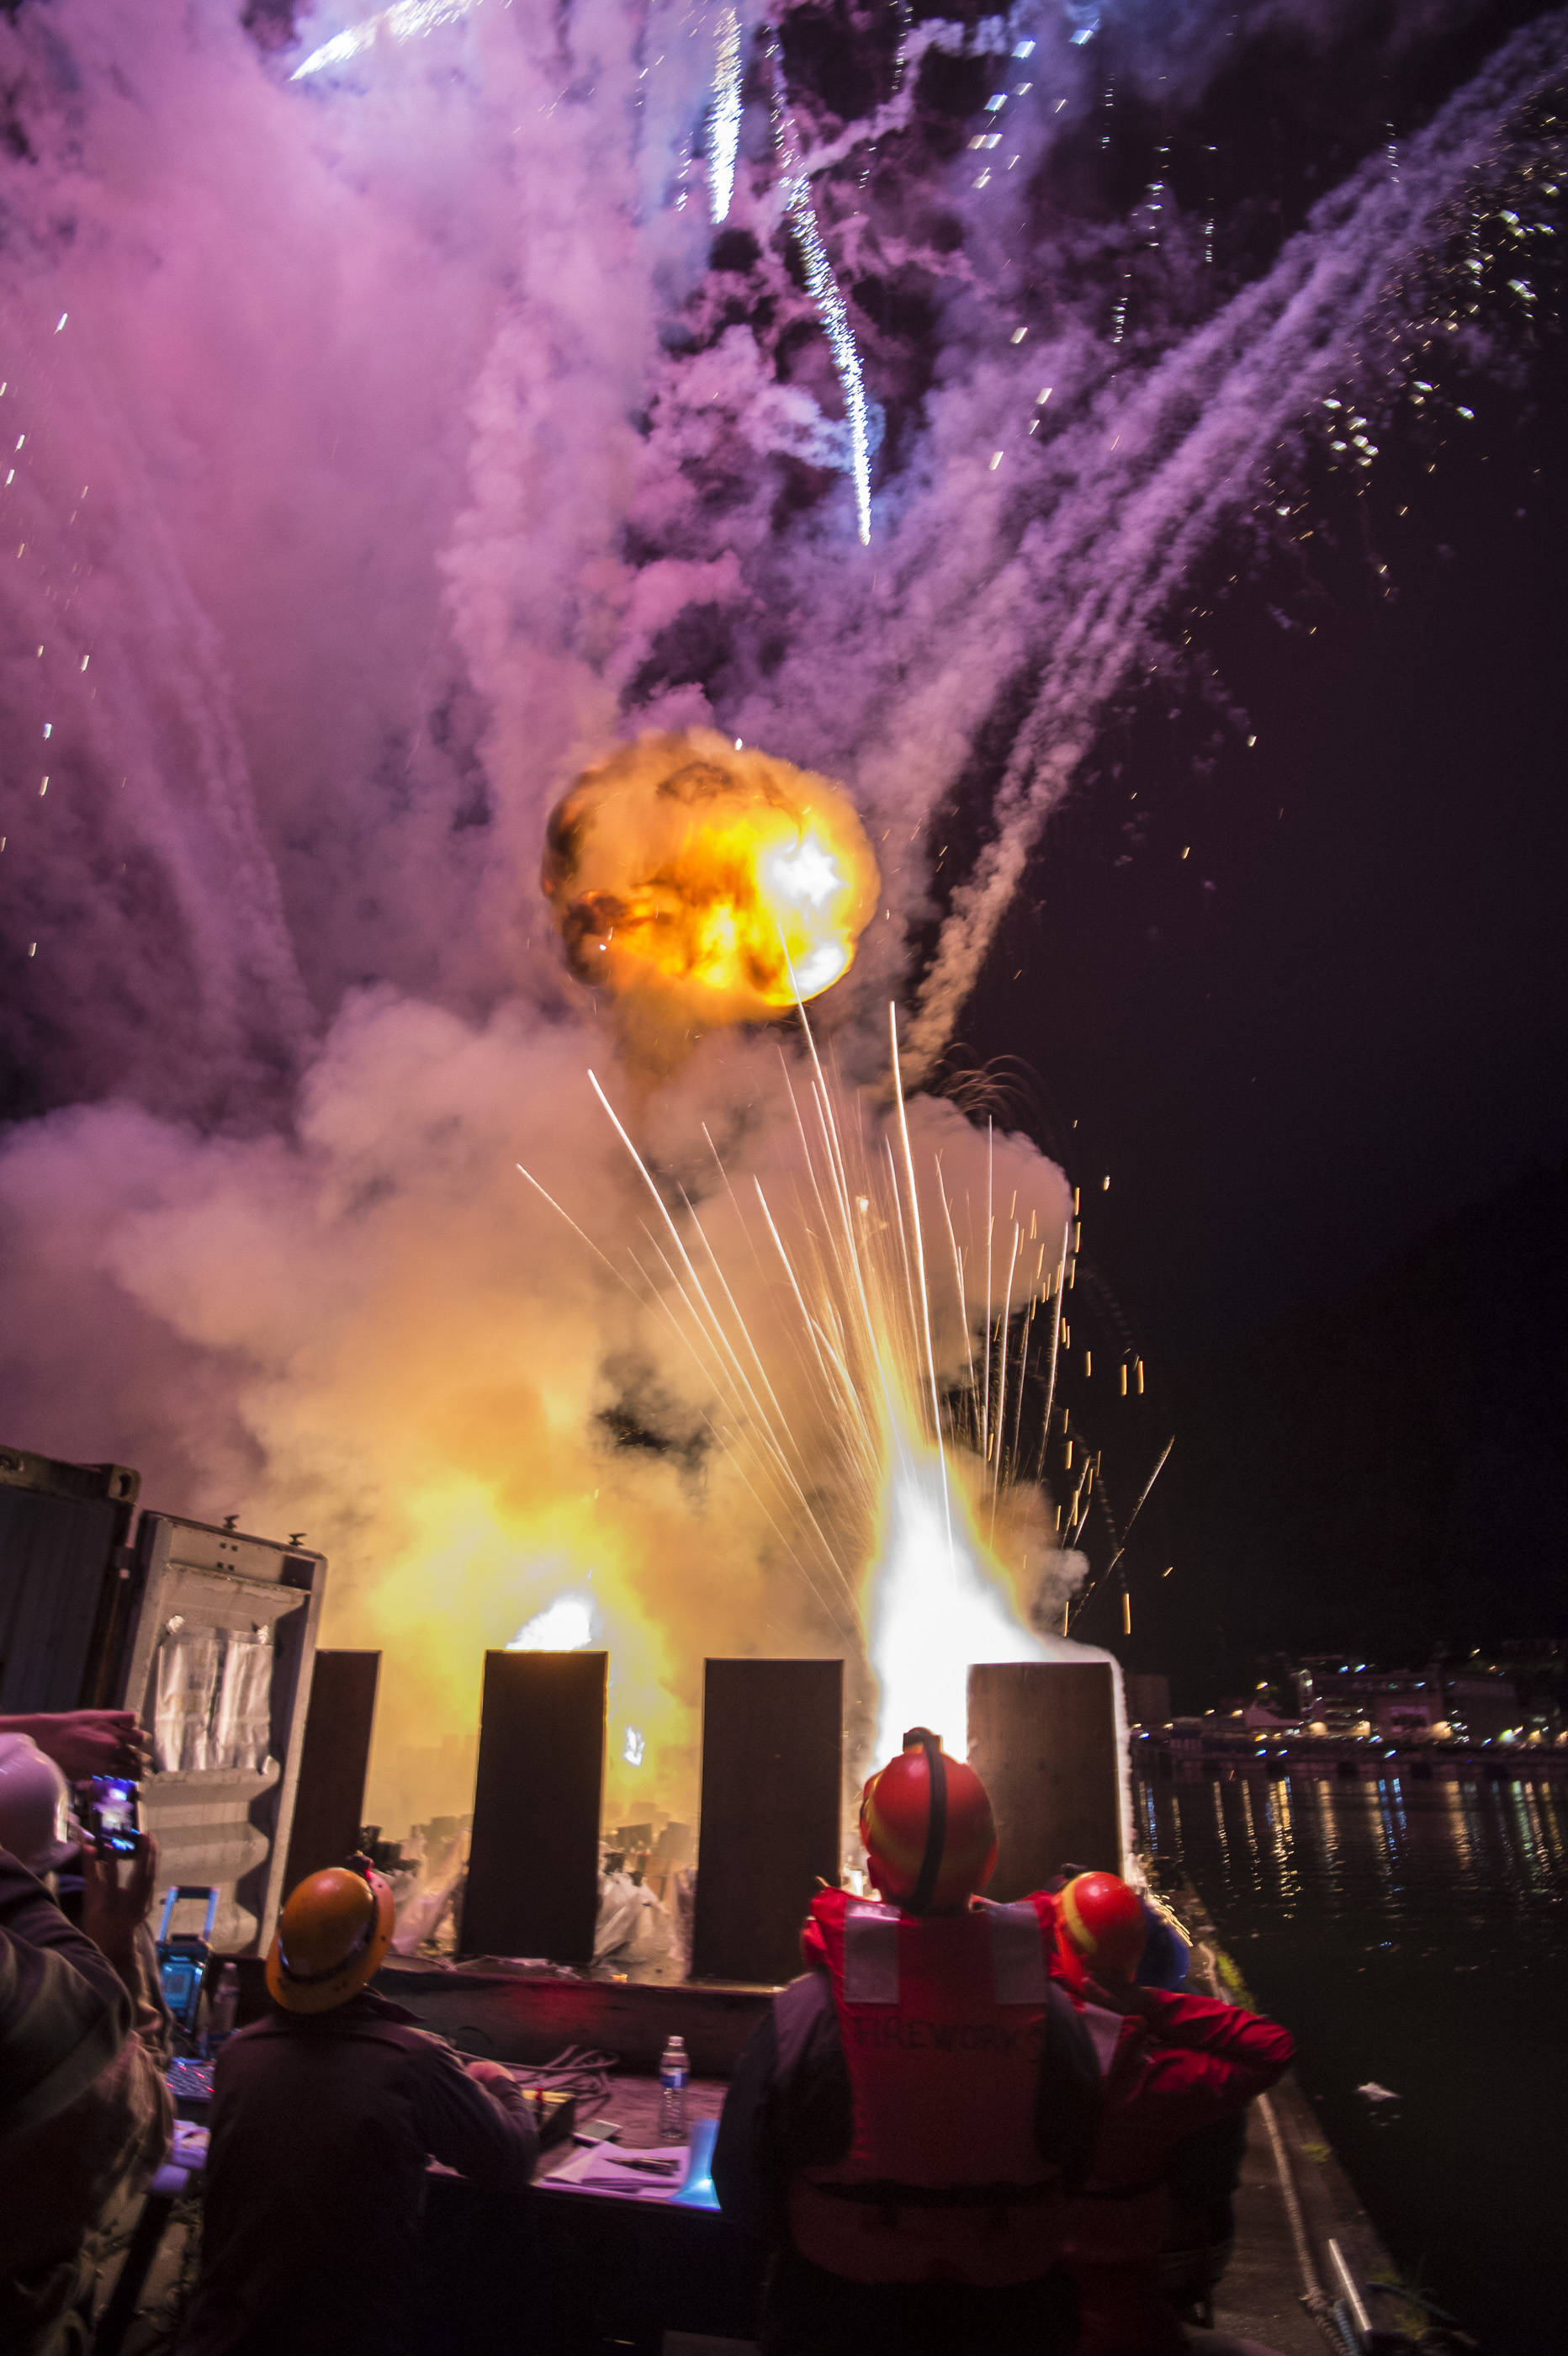 Volunteers set off a cremora fireball along with other exposives during the annual city-funded fireworks show in Juneau’s downtown harbor on Tuesday, July 3, 2017. (Michael Penn | Juneau Empire)